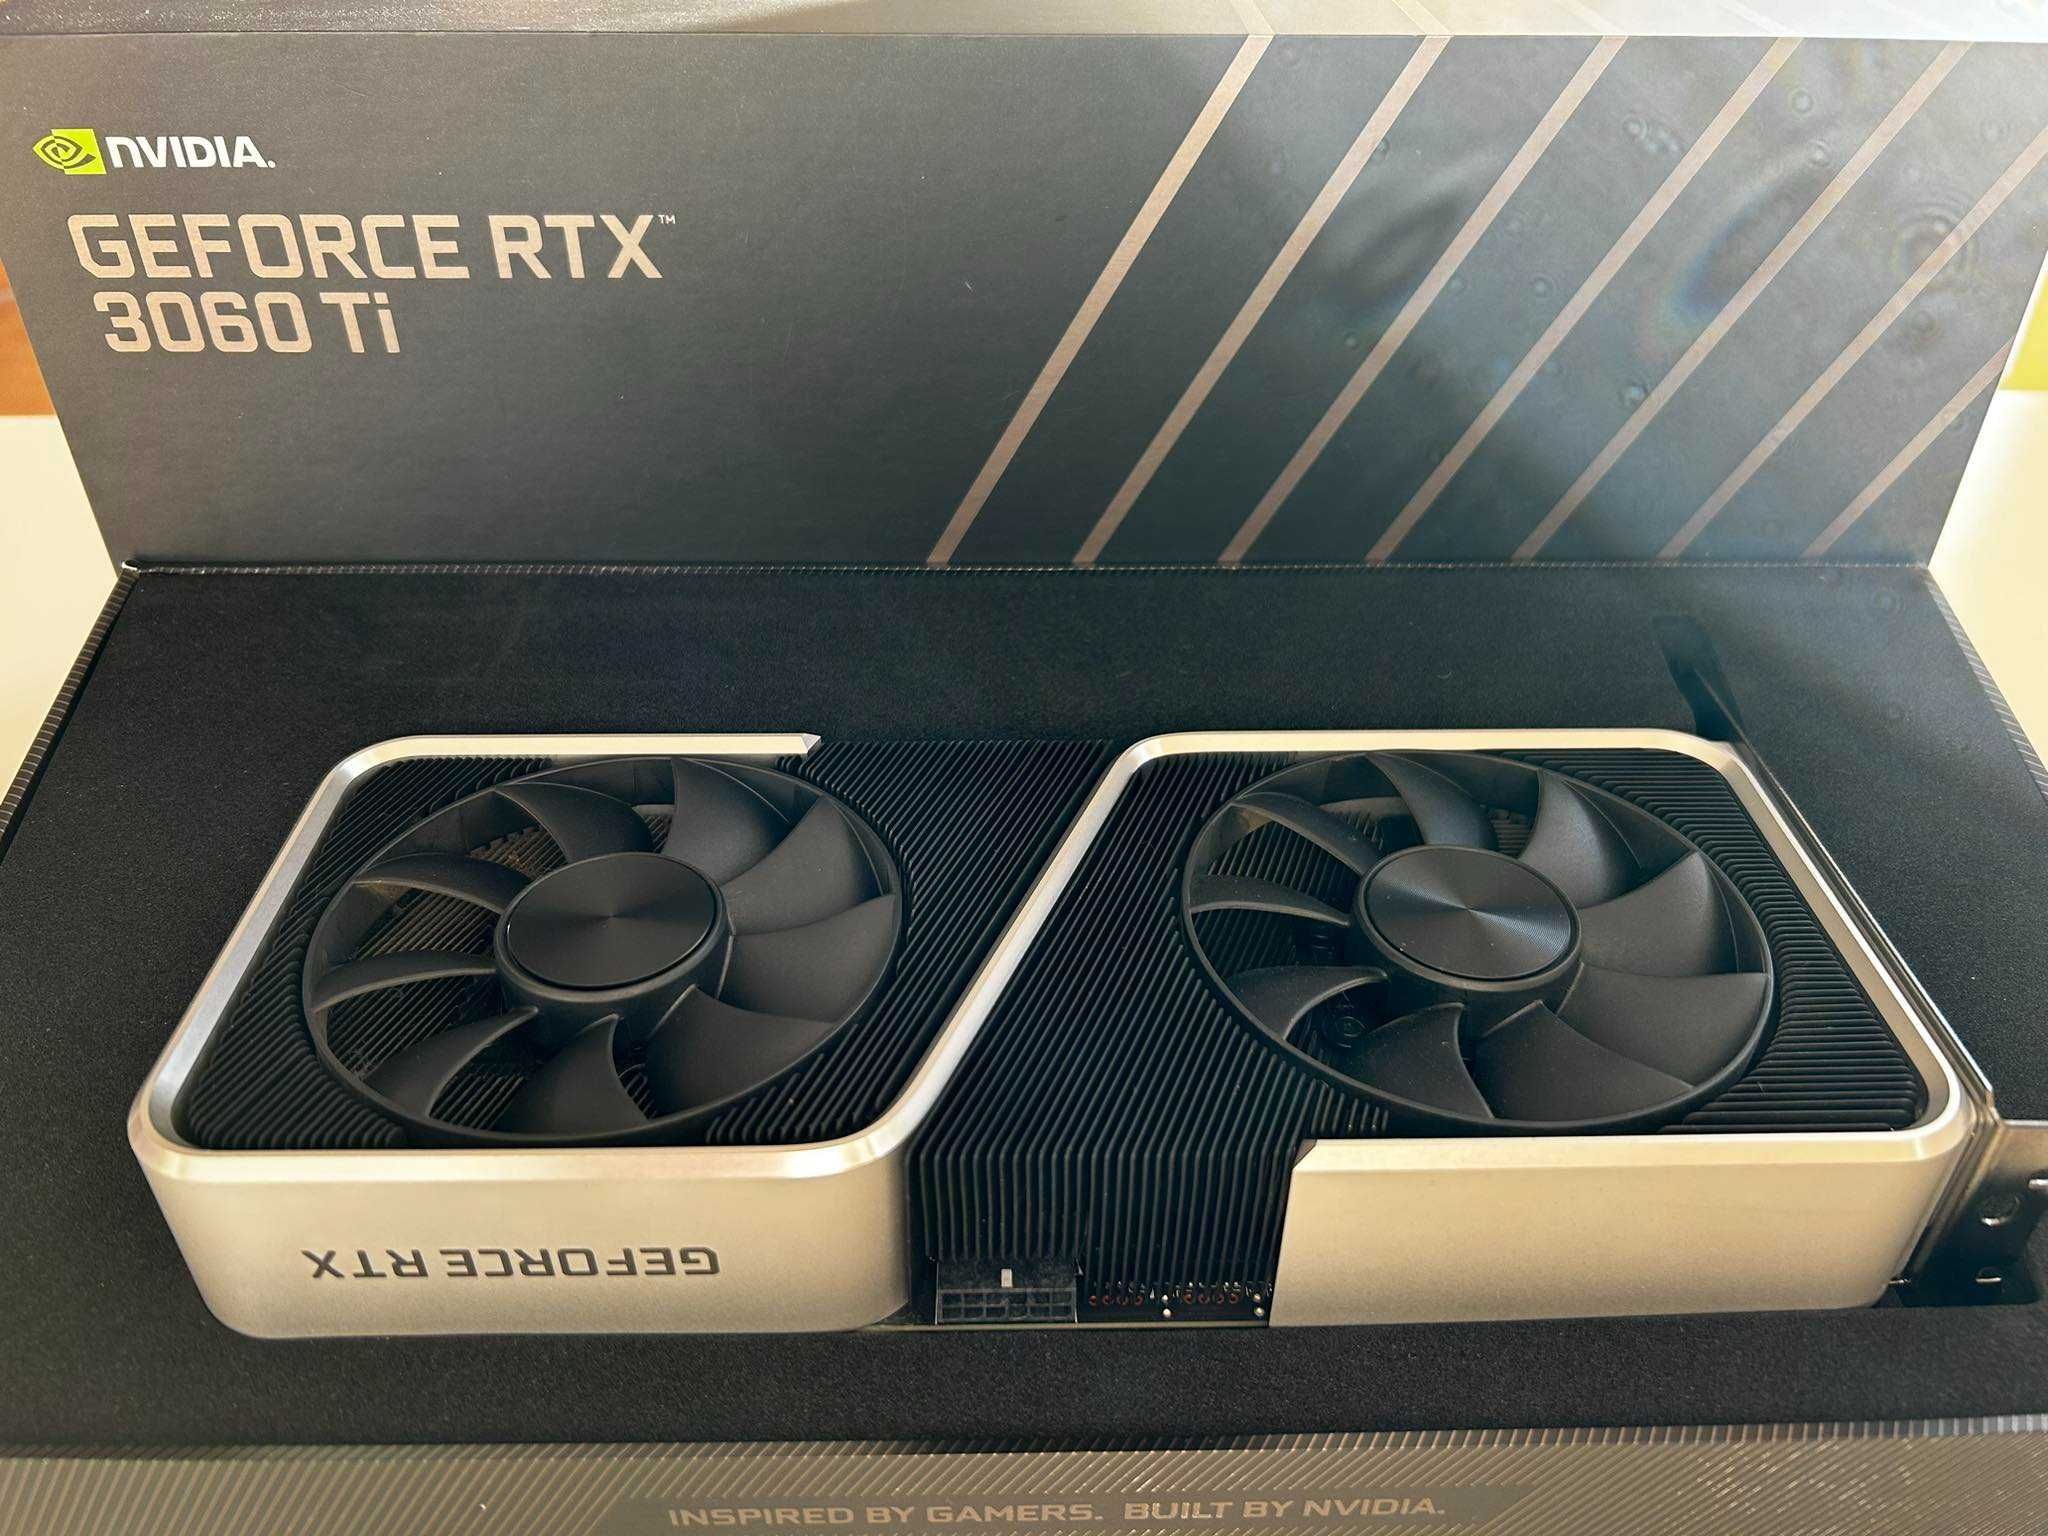 GEFORCE NVIDIA 3060ti Founders Edition